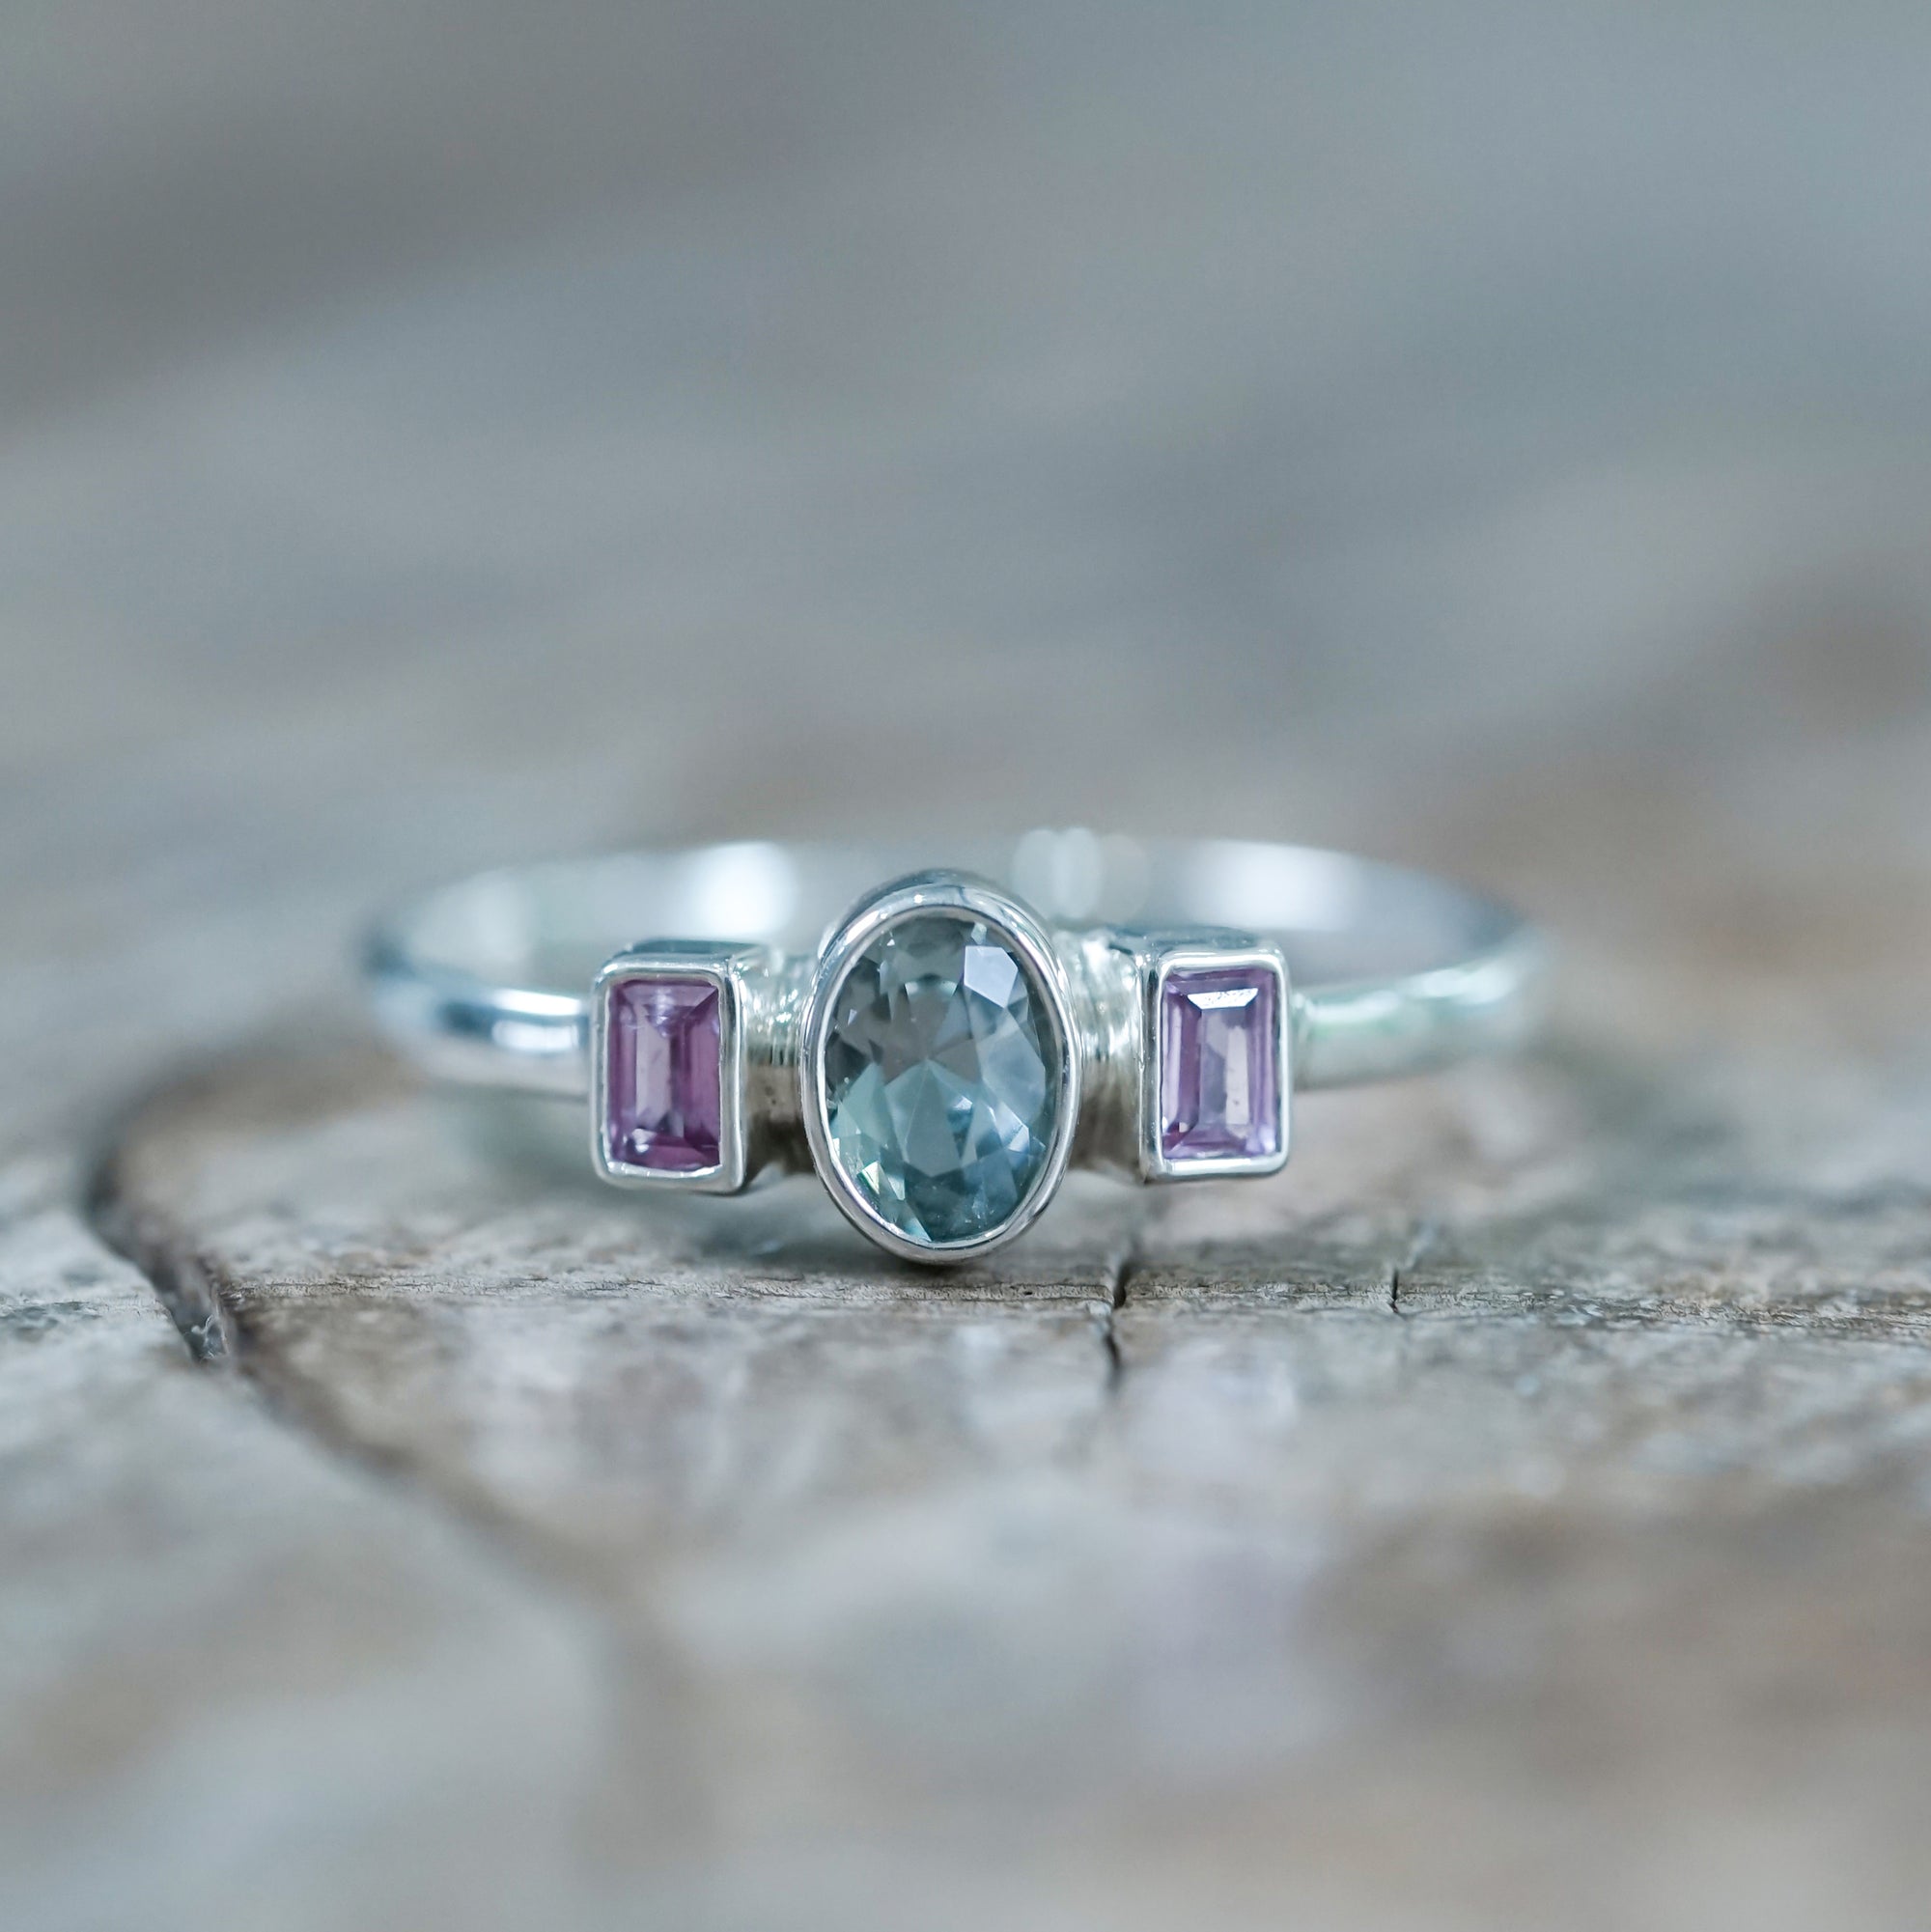 Pink and Blue Sapphire Ring - Gardens of the Sun | Ethical Jewelry